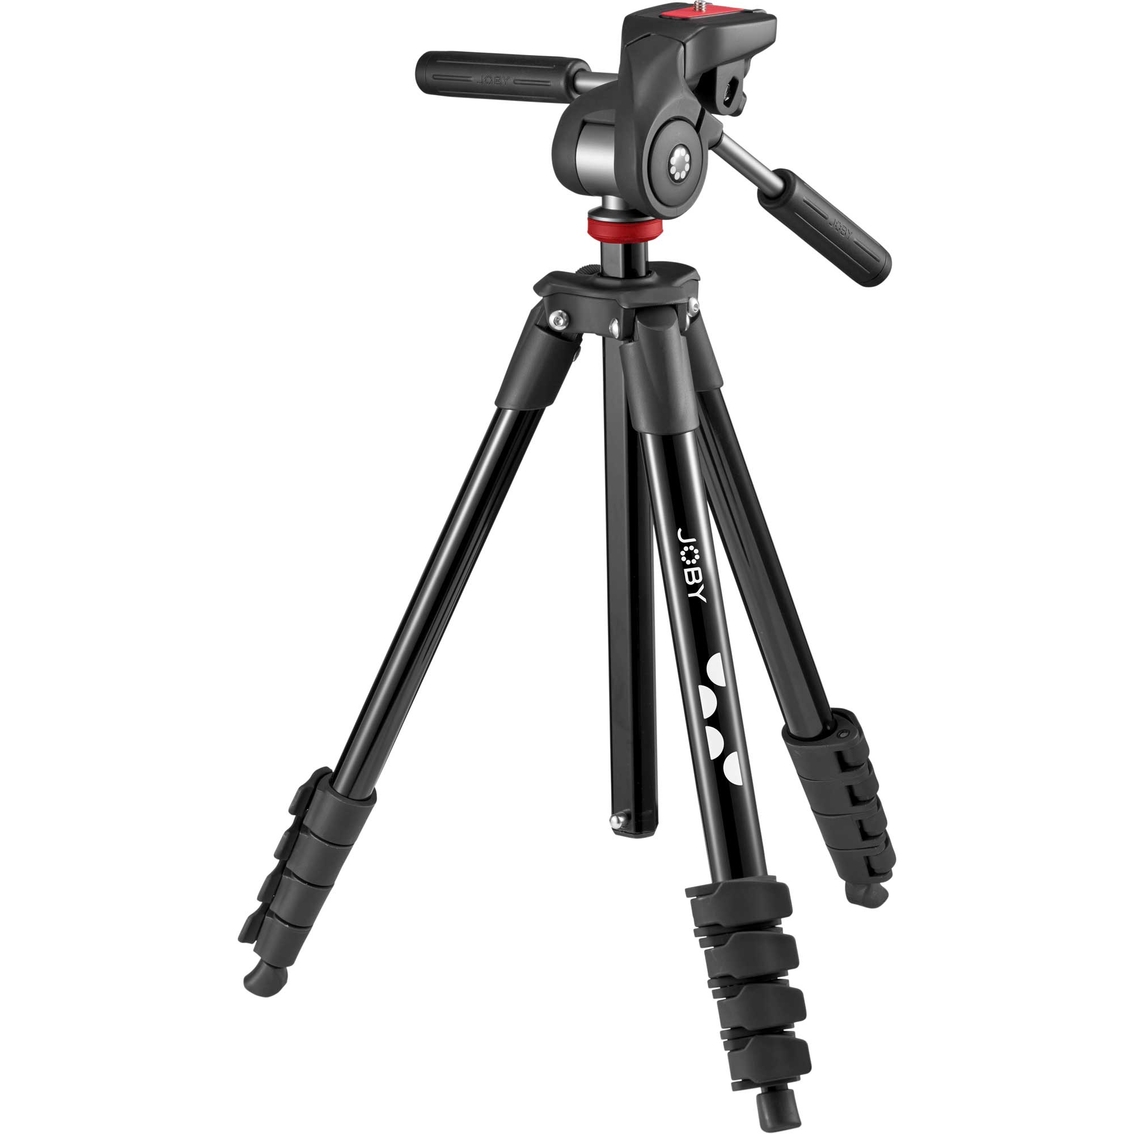 Manfrotto Joby Compact Advanced Tripod - Image 1 of 2